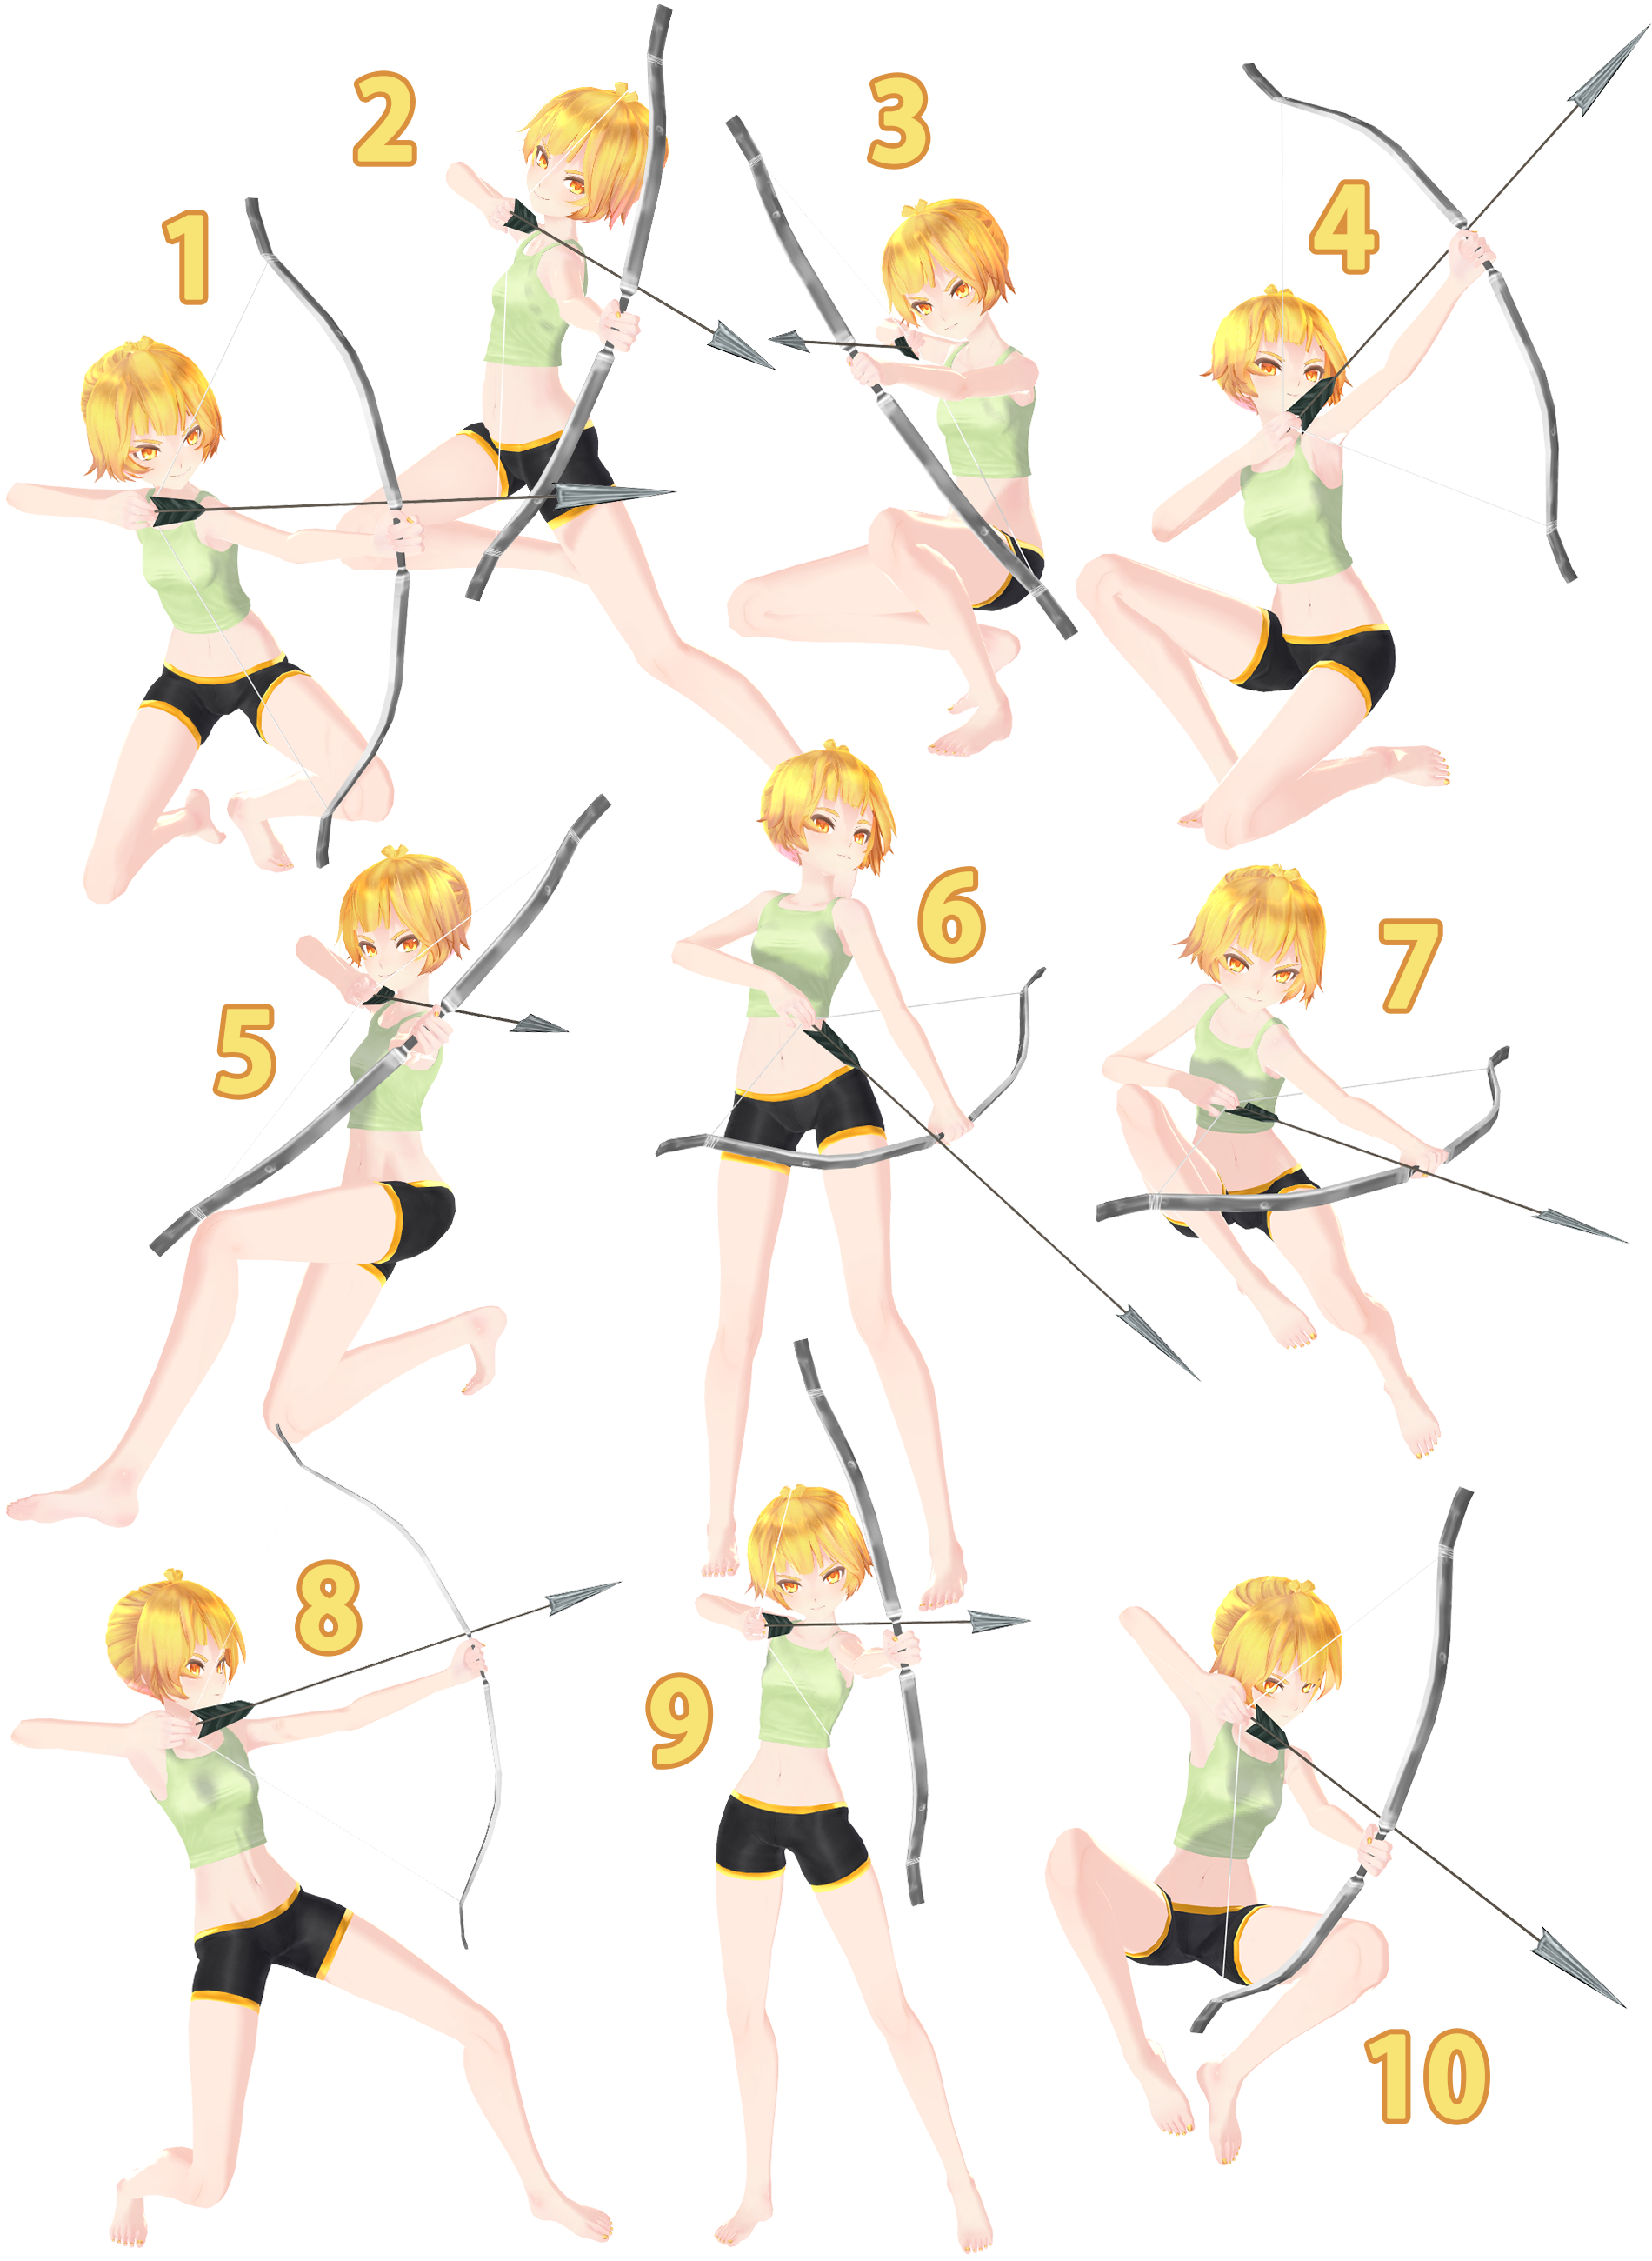 Mmd Archery Pose Pack Dl By Snorlaxin On Deviantart